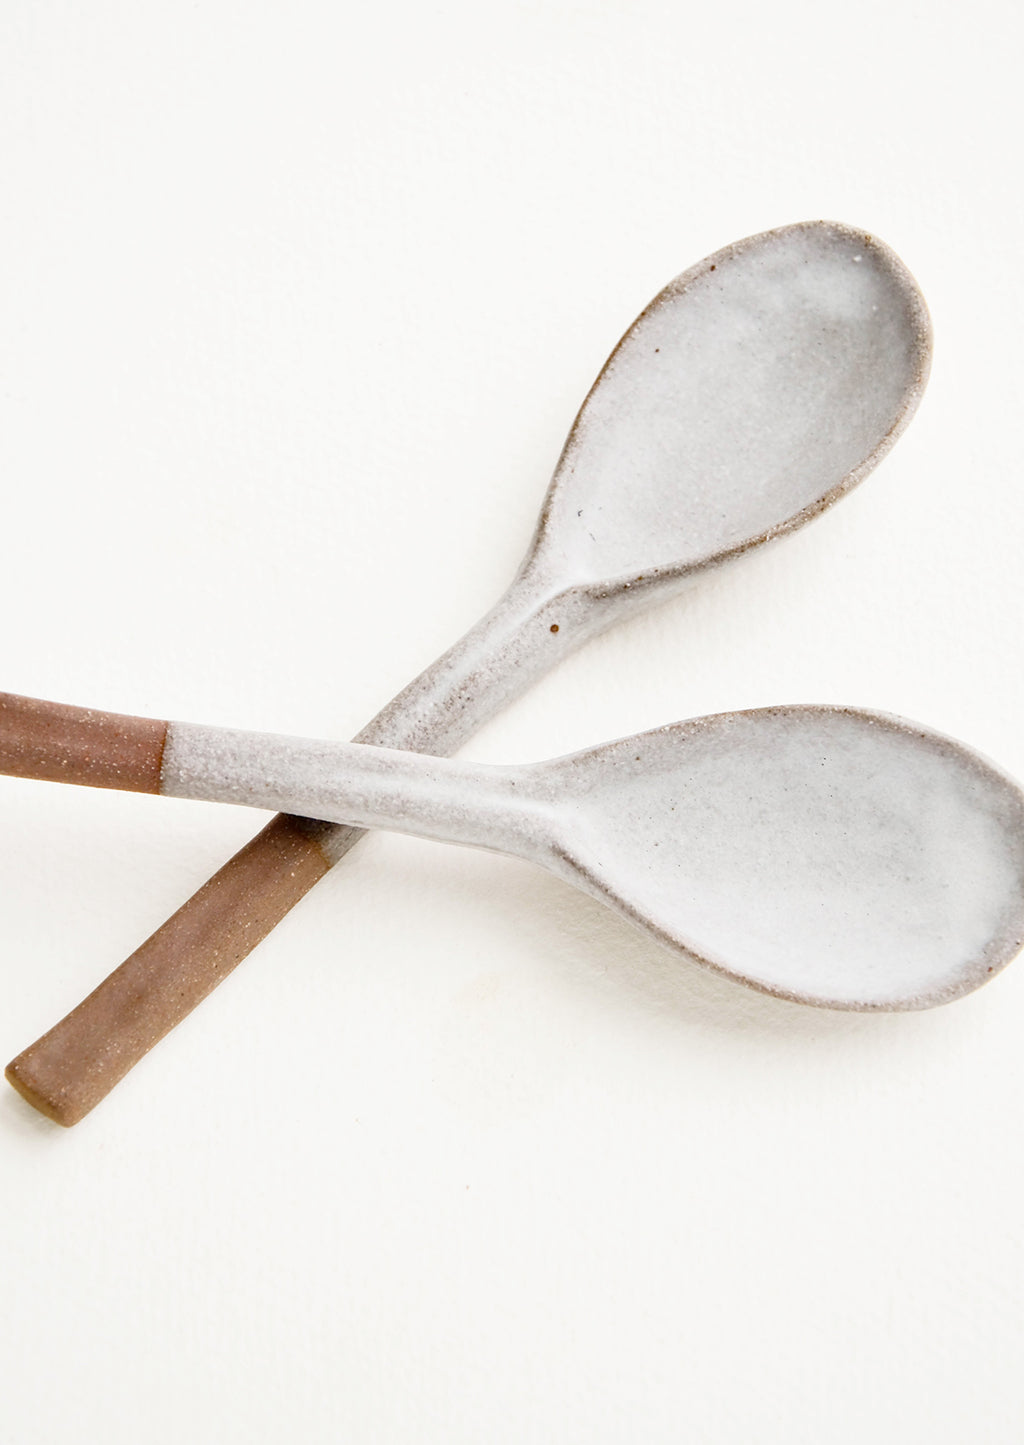 1: Ceramic spoons in earthy brown clay dipped in white glaze